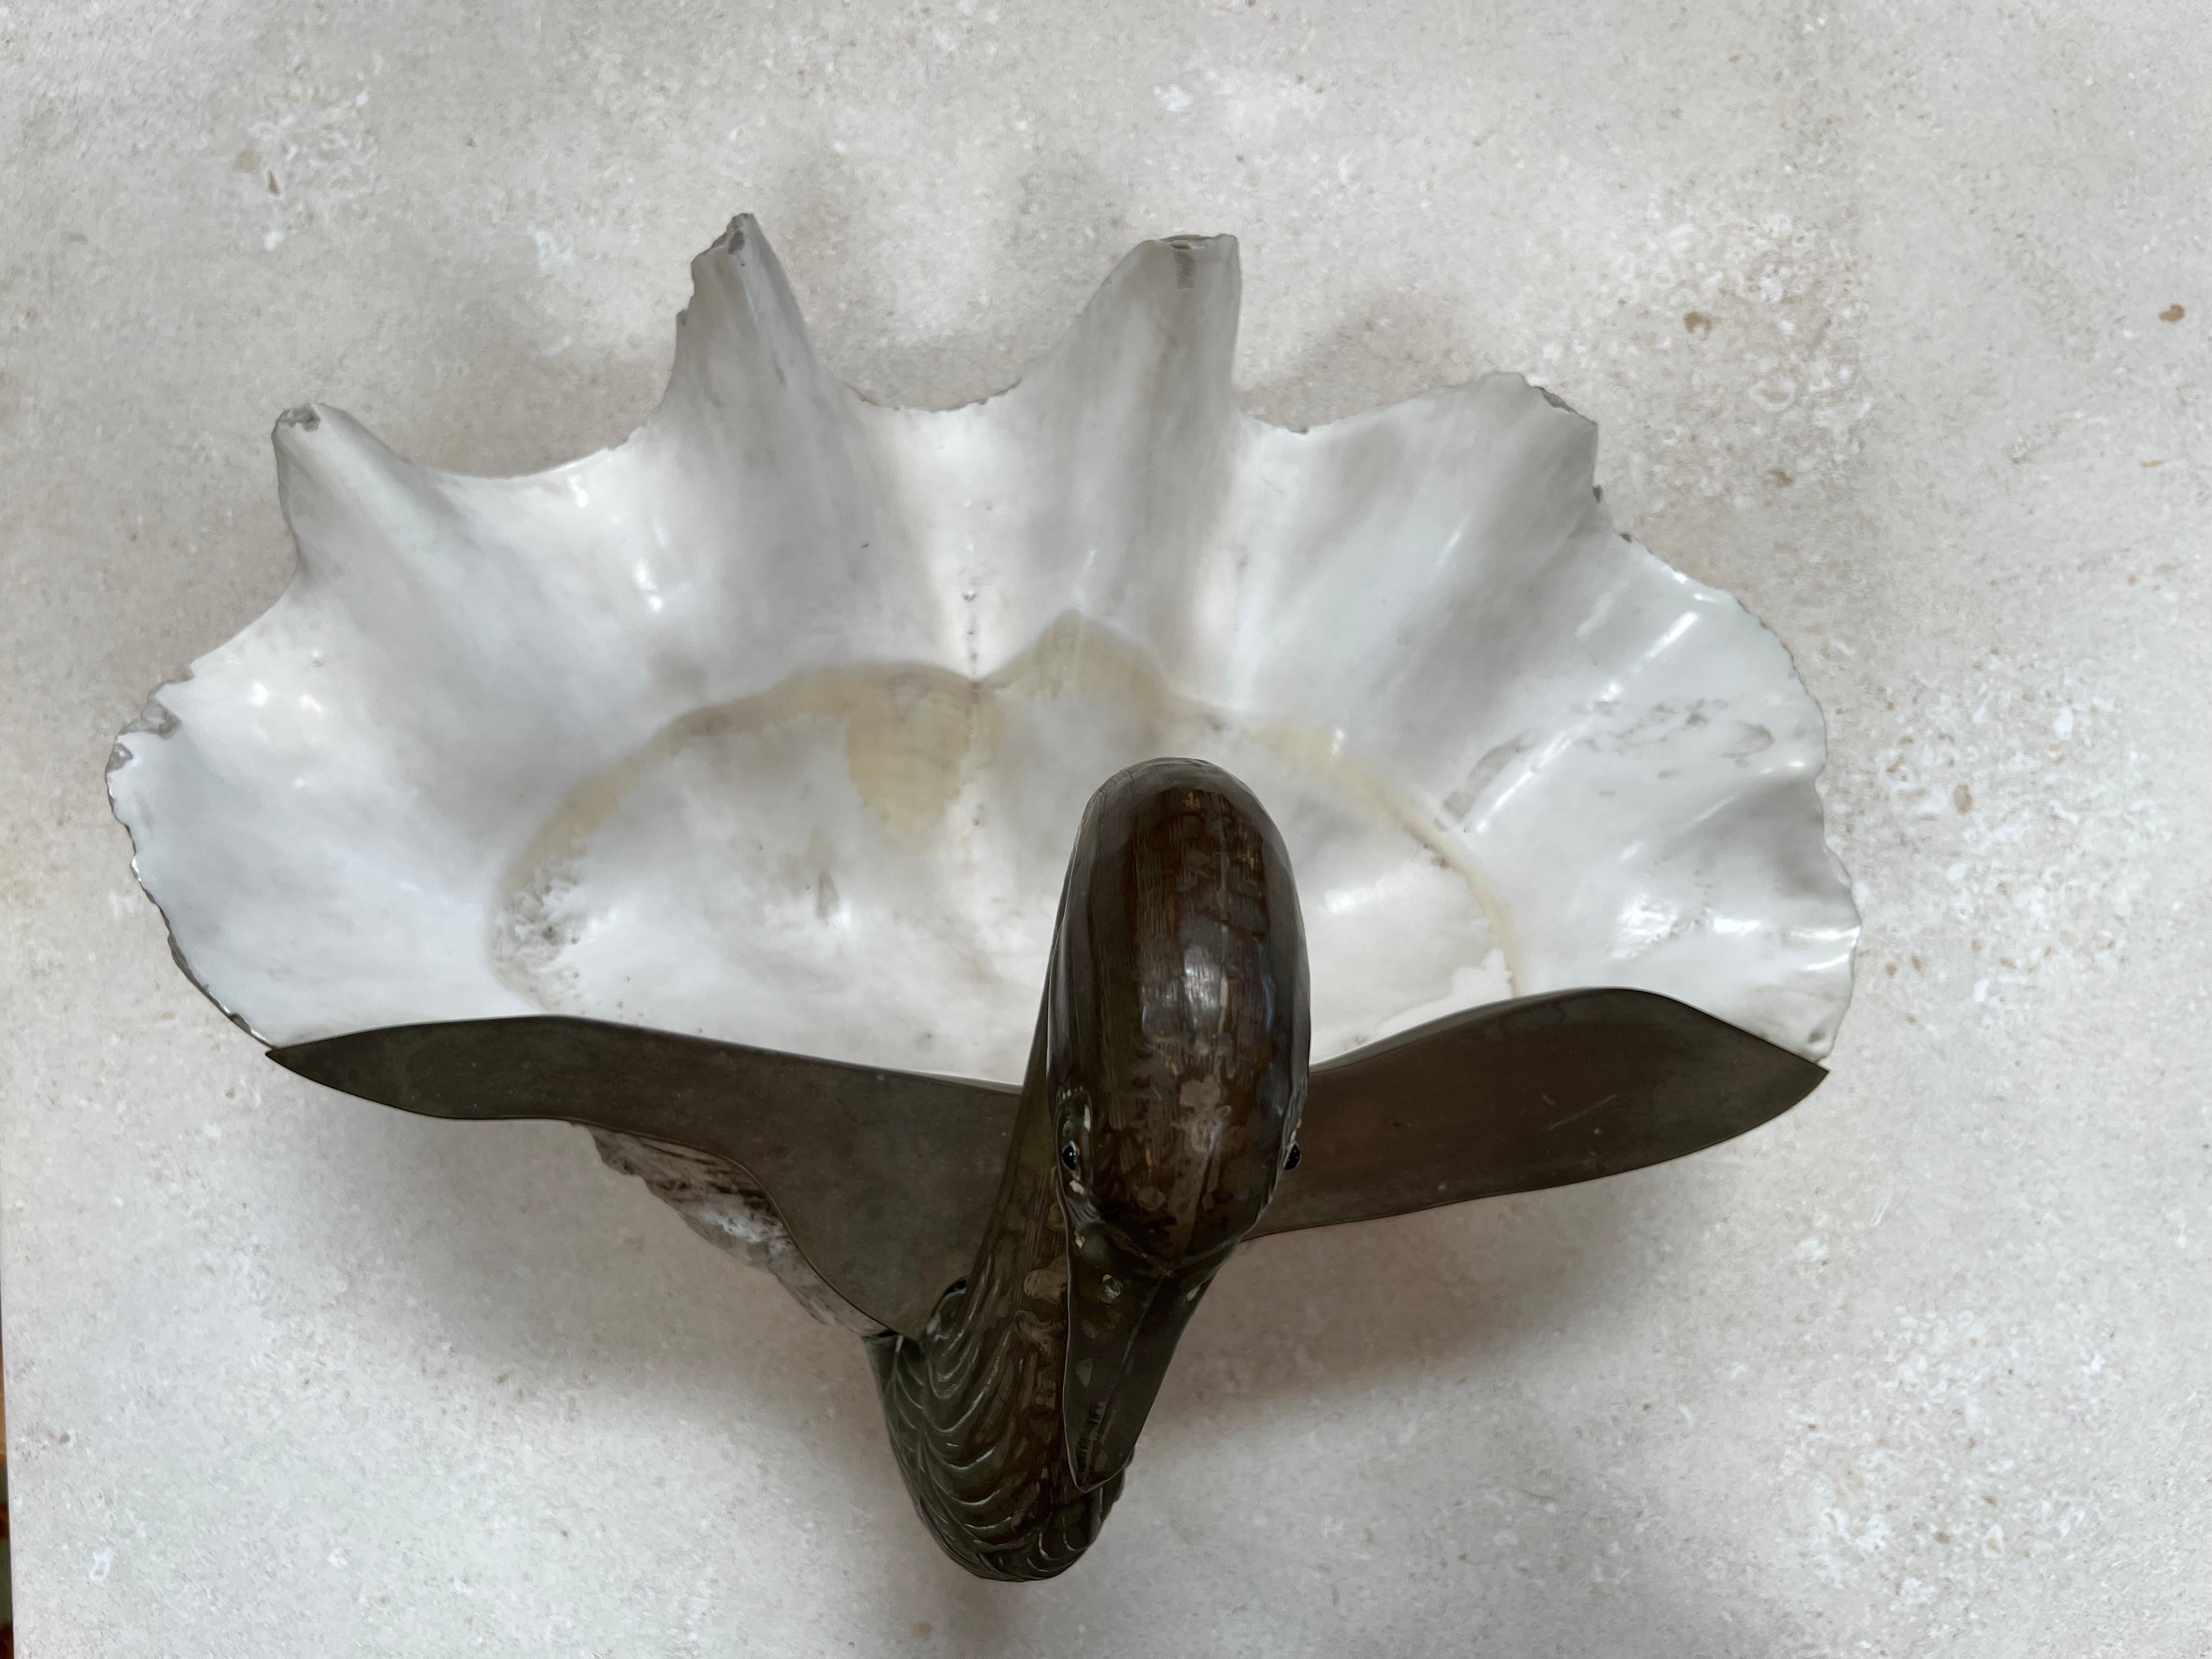 The Shell and Silvered Brass Duck Shaped Trinket-Bowl, crafted in Italy circa 1970, is a charming and whimsical piece of art. Its unique design features a delicate shell serving as the bowl, beautifully complemented by silvered brass detailing in